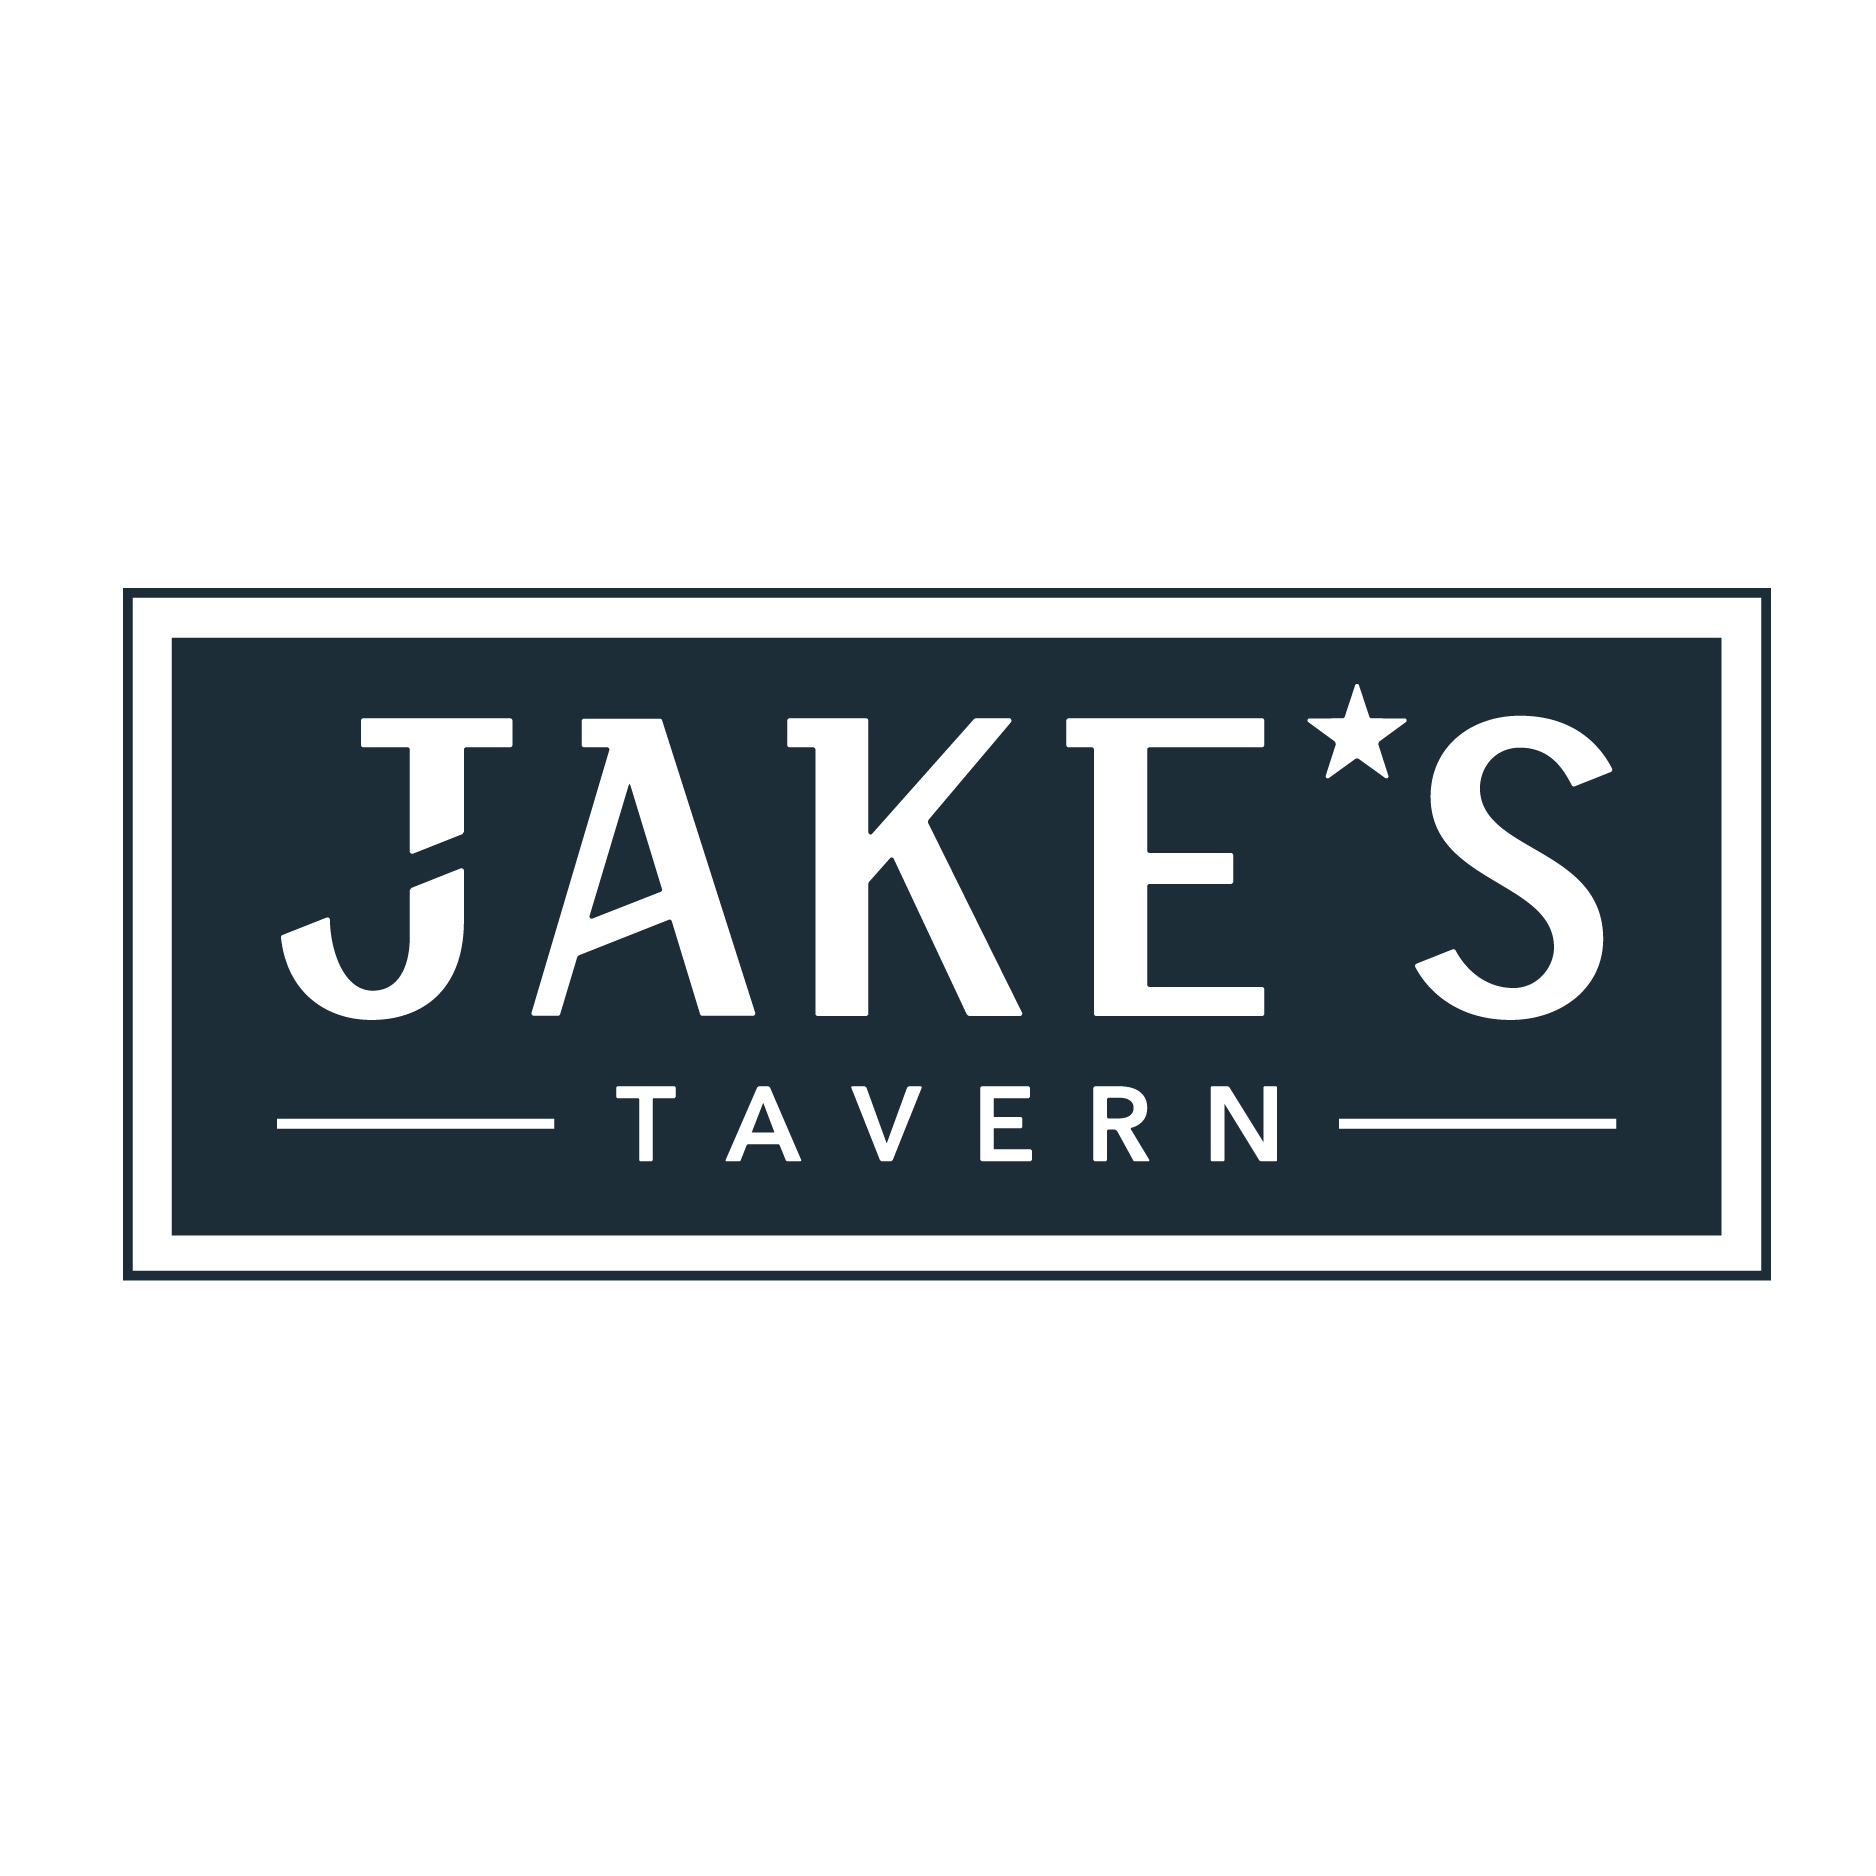 JAKE'S TAVERN logo design by logo designer Seth Design Group for your inspiration and for the worlds largest logo competition